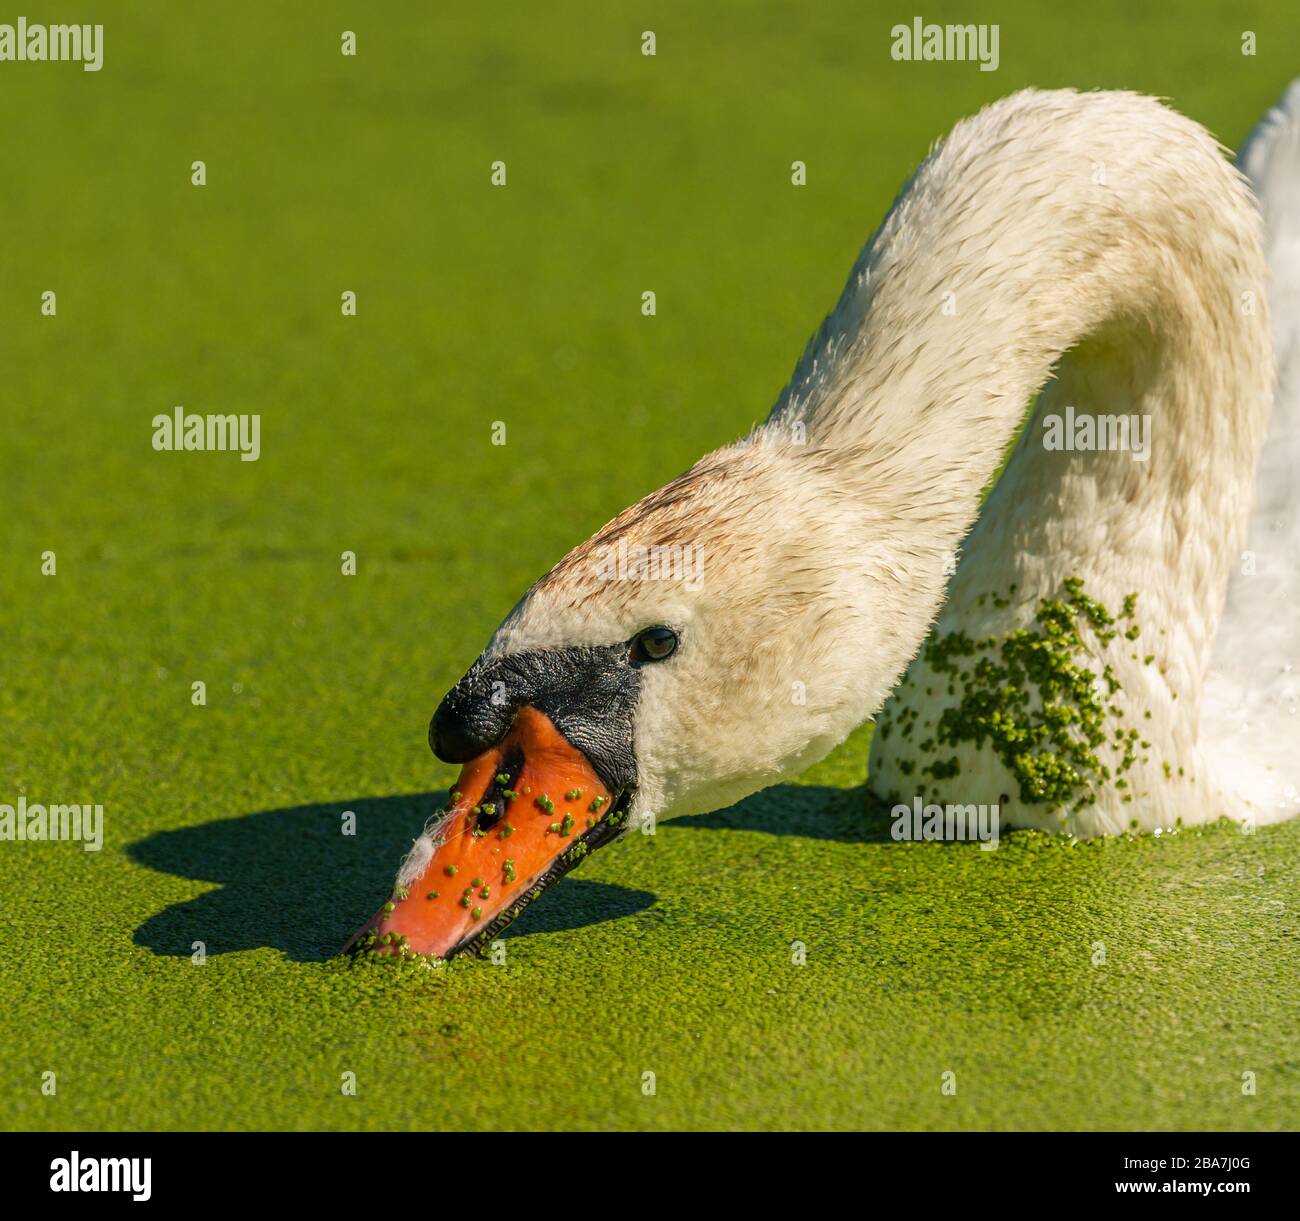 white swan bird swimming in the green water with duckweed diving its beak for snack, animal wild Stock Photo